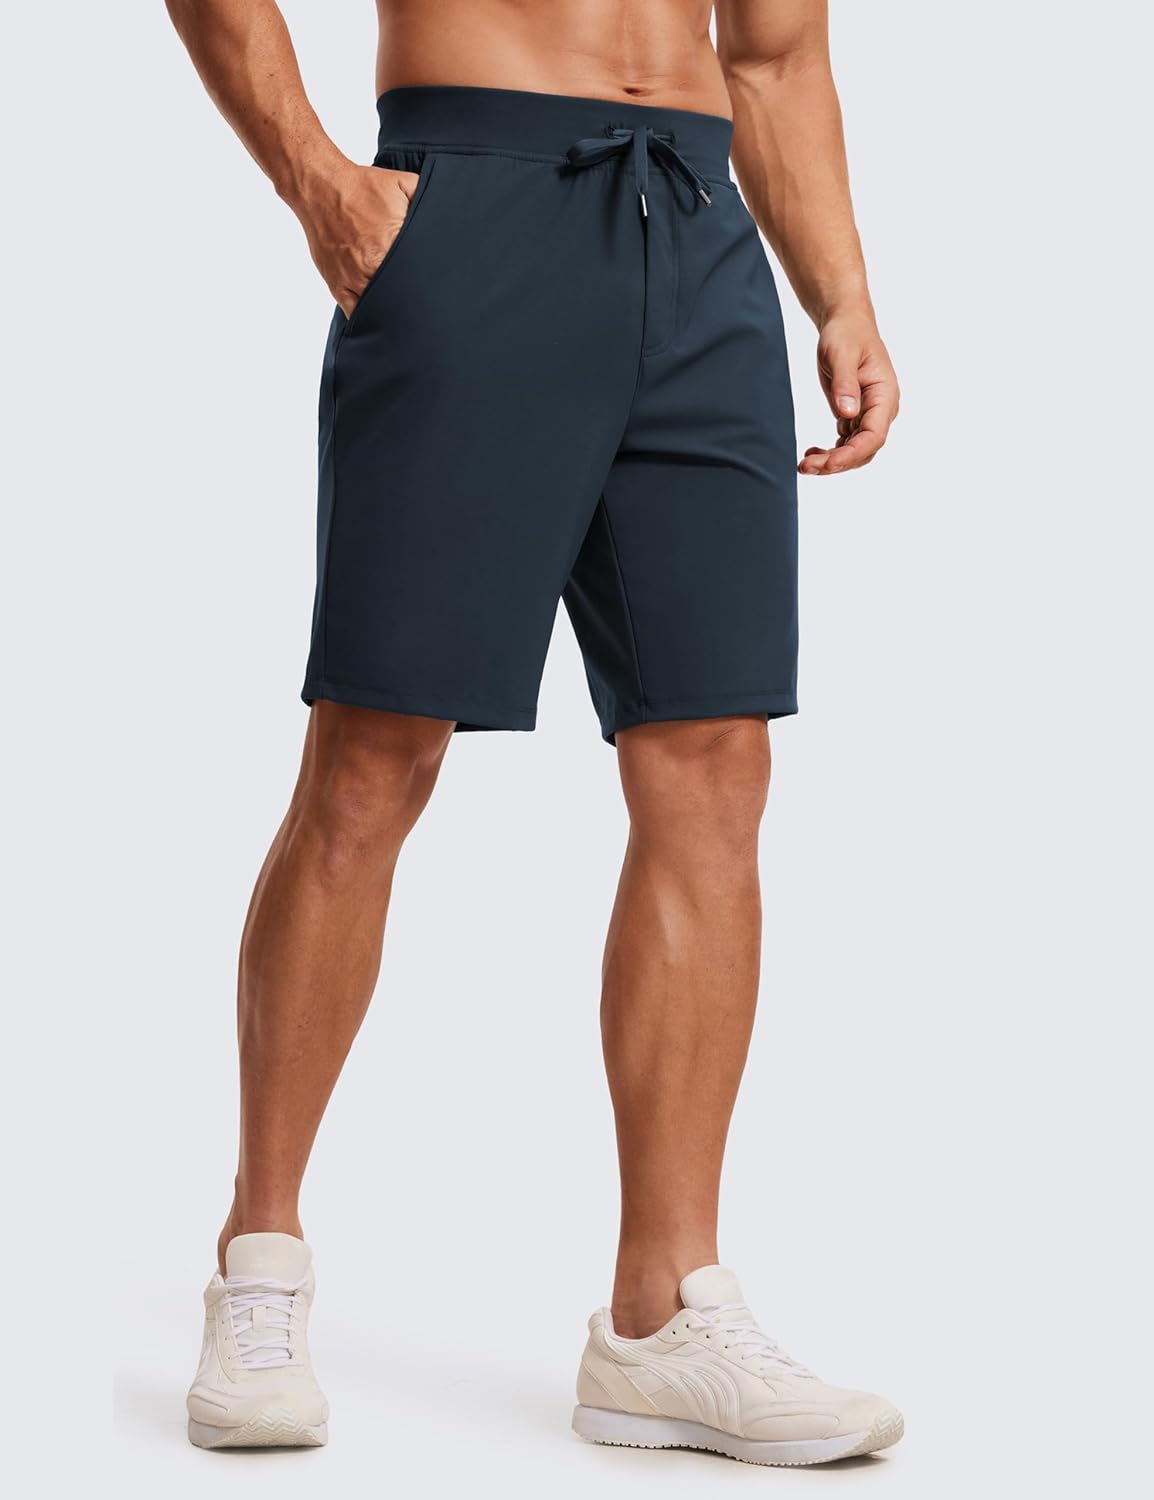 CRZ YOGA Men's Four-Way Stretch Workout Shorts - The Perfect Athletic Shorts for Versatile Performance